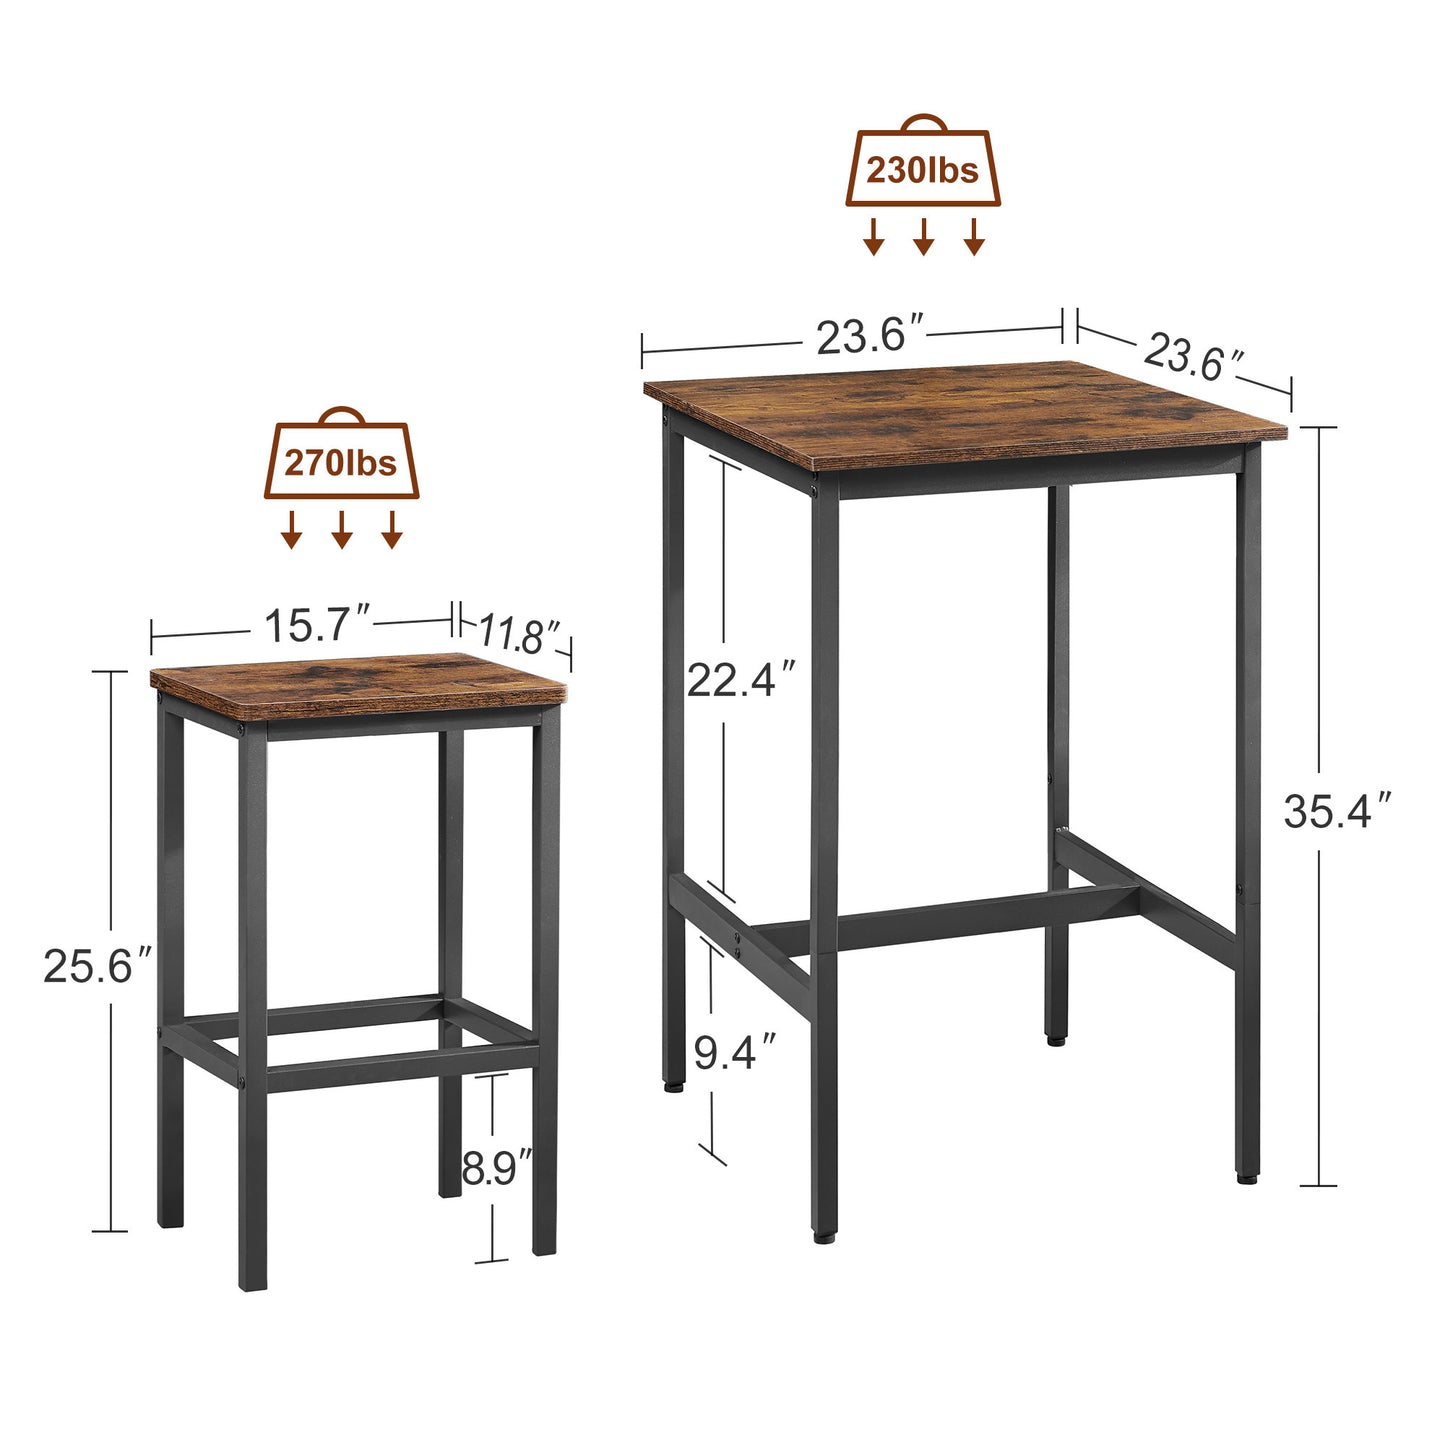 Jona Square Bar Table with 2 Bar Chairs